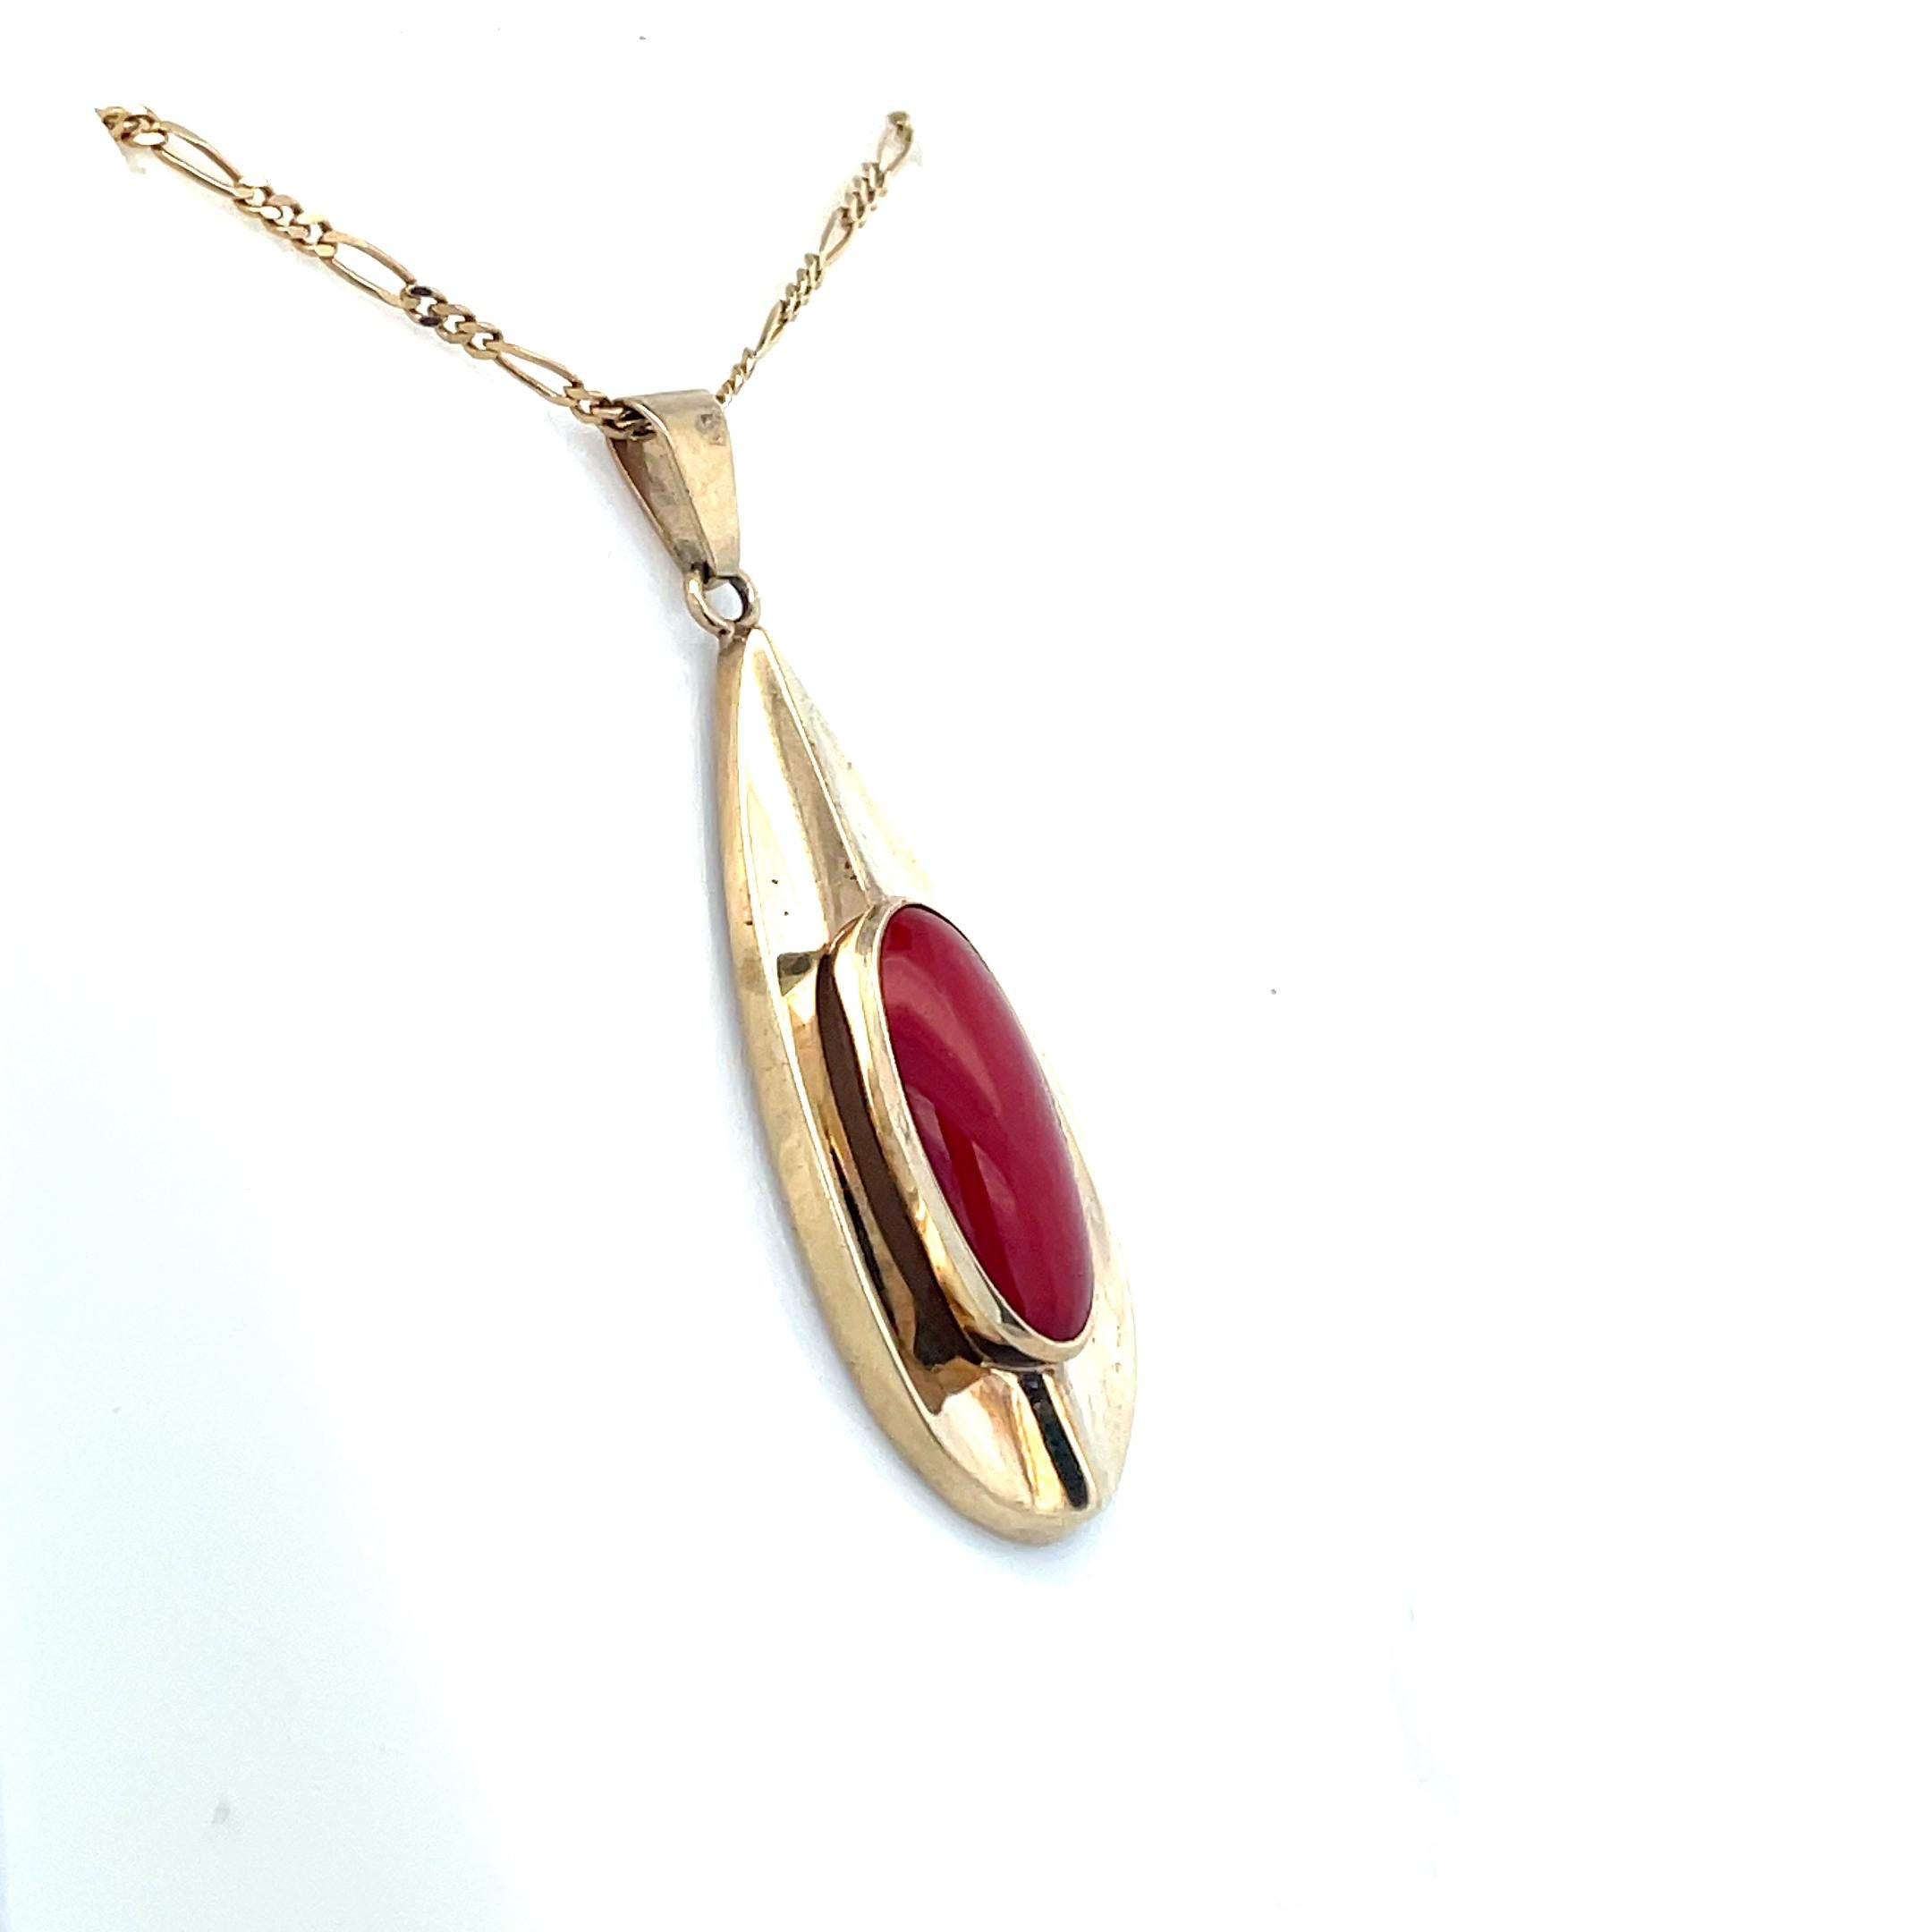 Intense Un-Dyed Red Coral Pendant 1950s Mid Century 

This is an extraordinary 1950 un-dyed intense red coral pendant, encased in lustrous yellow gold. This mesmerizing piece is a testament to the beauty and allure of natural coral, showcasing its